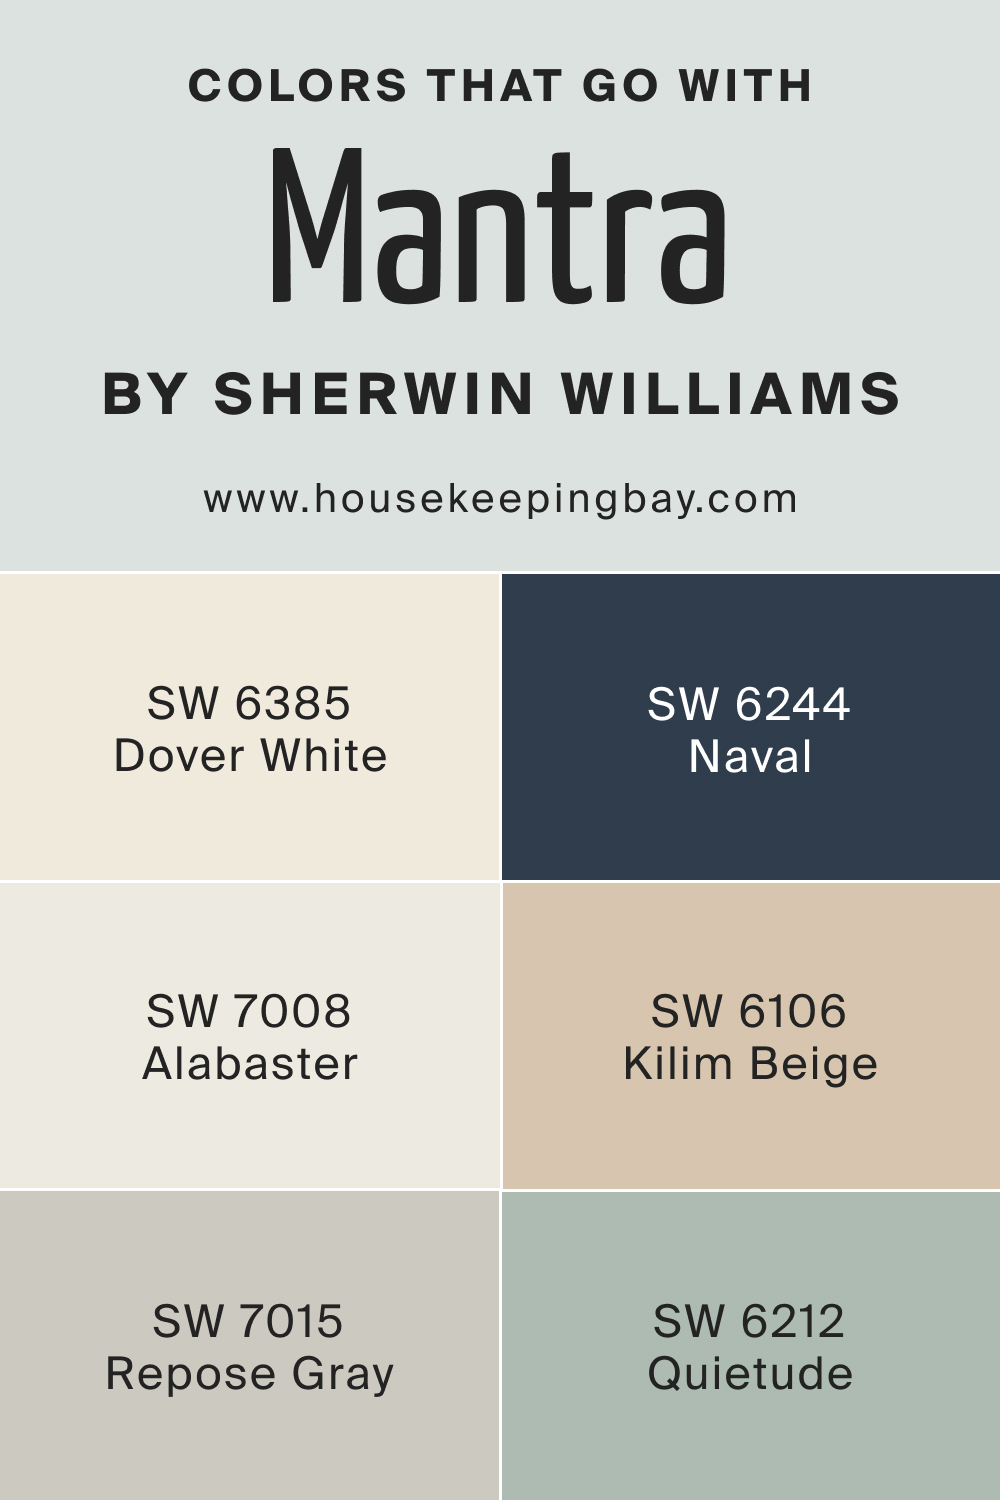 Colors that goes with SW 9631 Mantra by Sherwin Williams